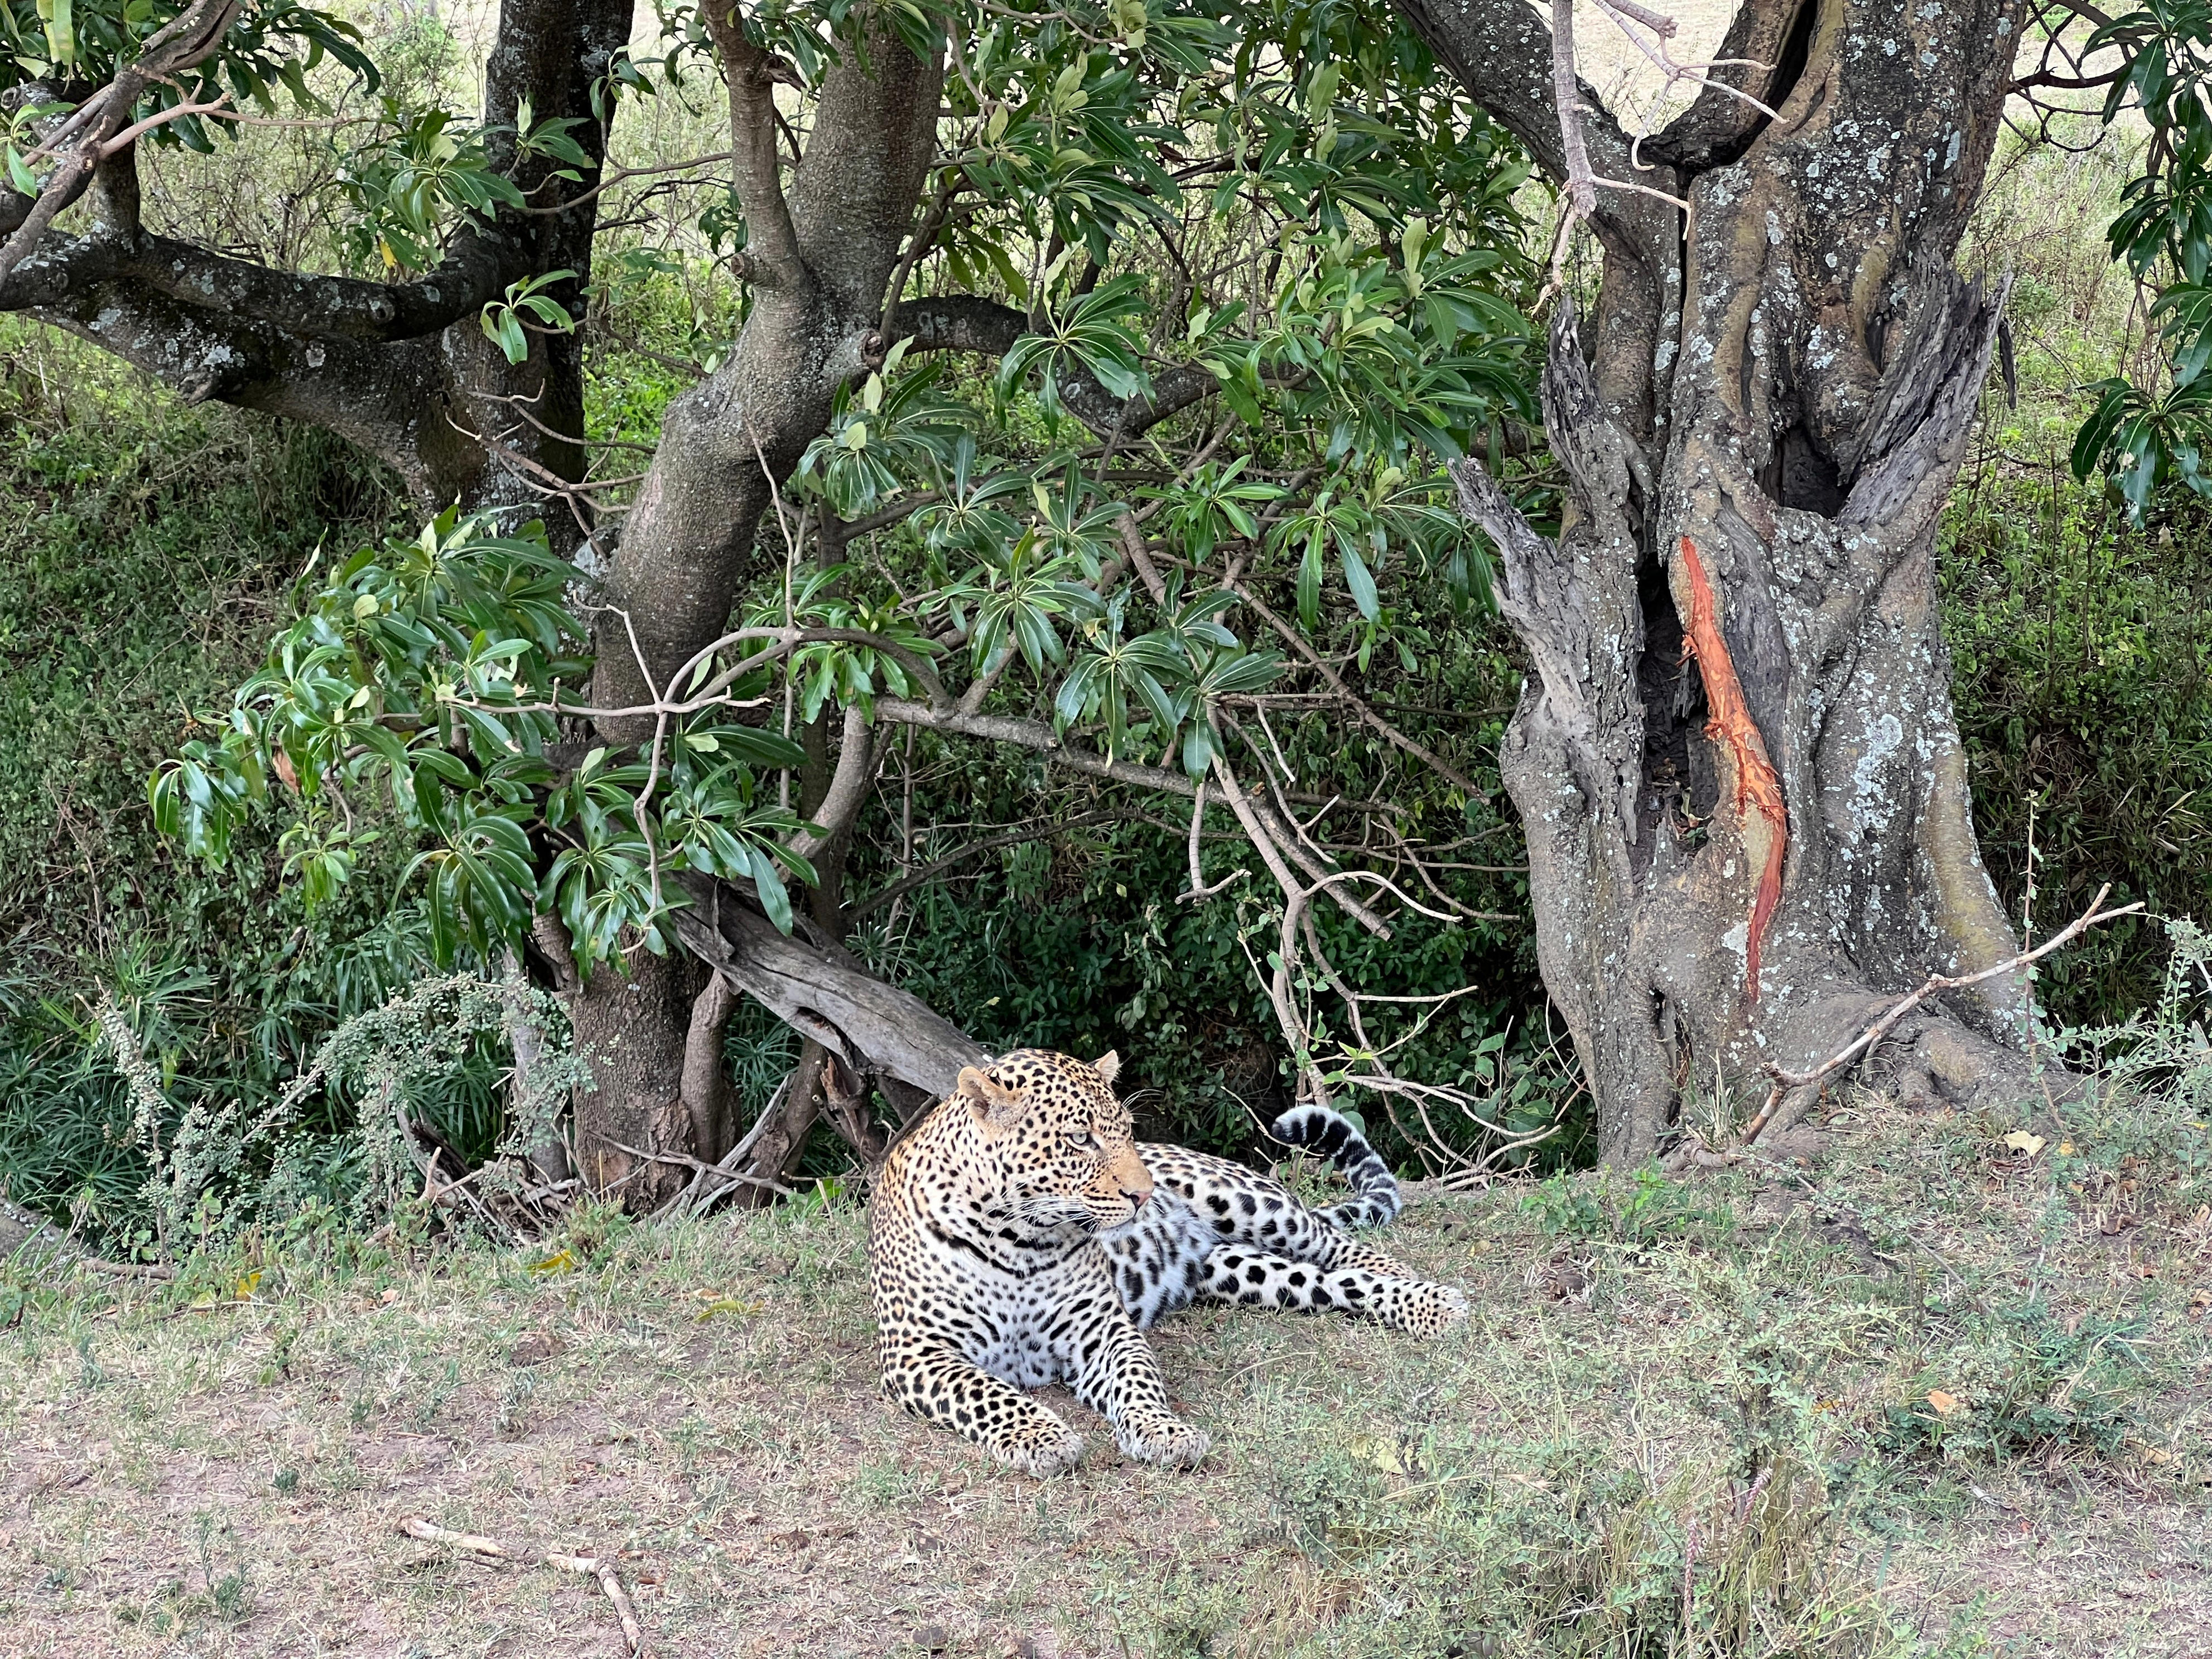 <p>The communication between guides in the private reserve paid off when one spotted a sleeping leopard.</p><p>When our group arrived, the leopard was napping on the tree next to his catch. Eventually, it came down, and we got a better look.</p>